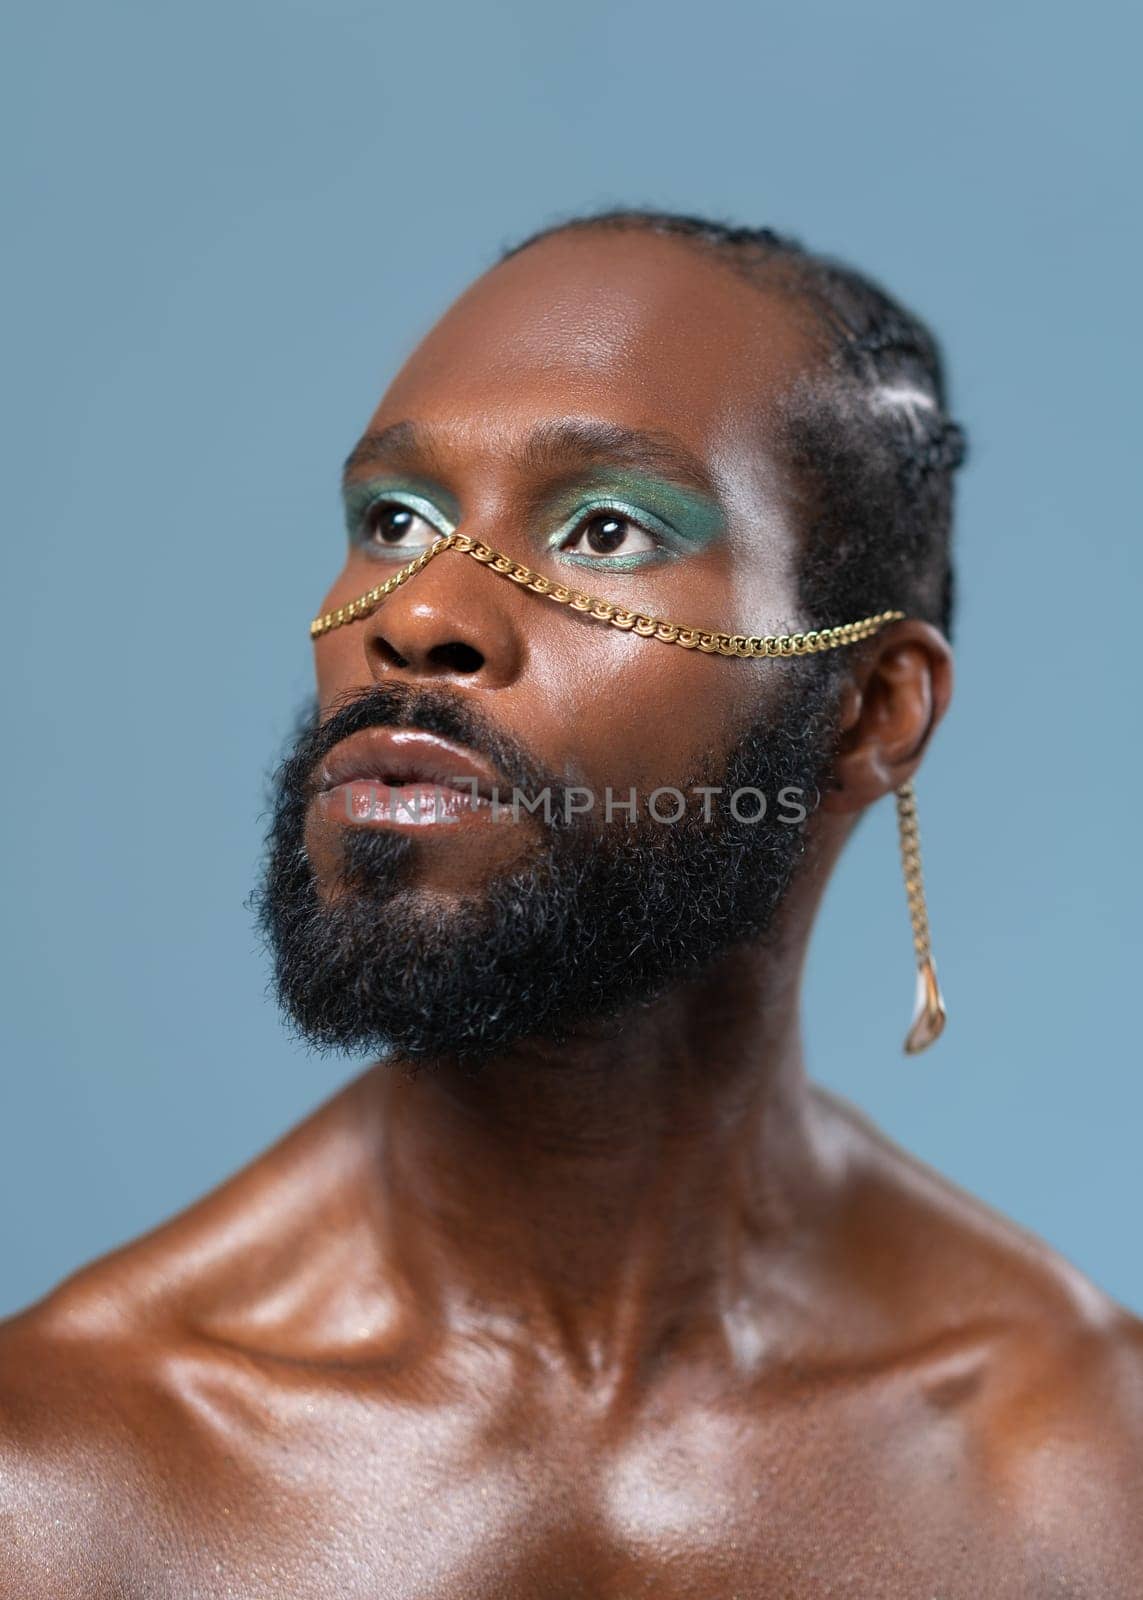 Confident african-american bearded gay man with bright makeup isolated on blue background, Close up portrait. Exudes sense of pride and individuality. Diversity power of personal style.